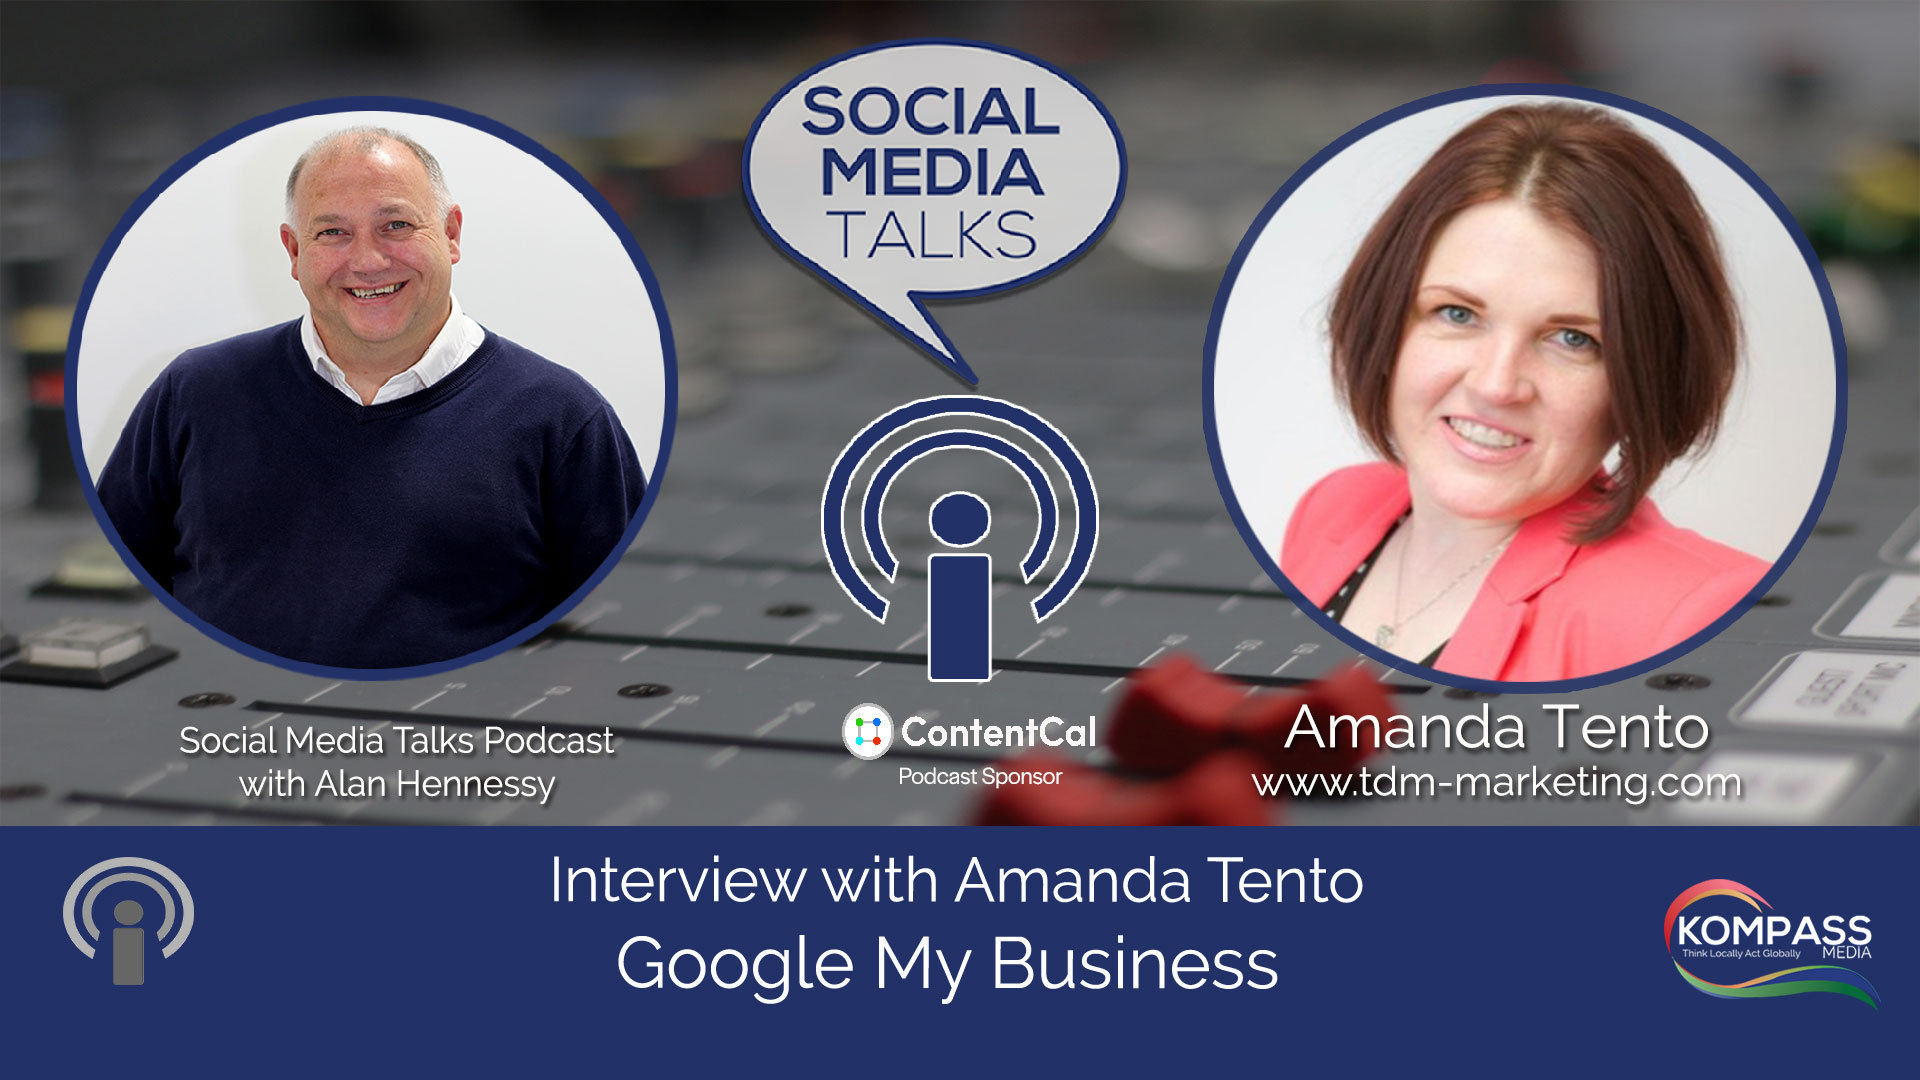 Amanda Tento Google My Business Interview on The Social Media Talks Podcast with Alan Hennessy from Kompass Media